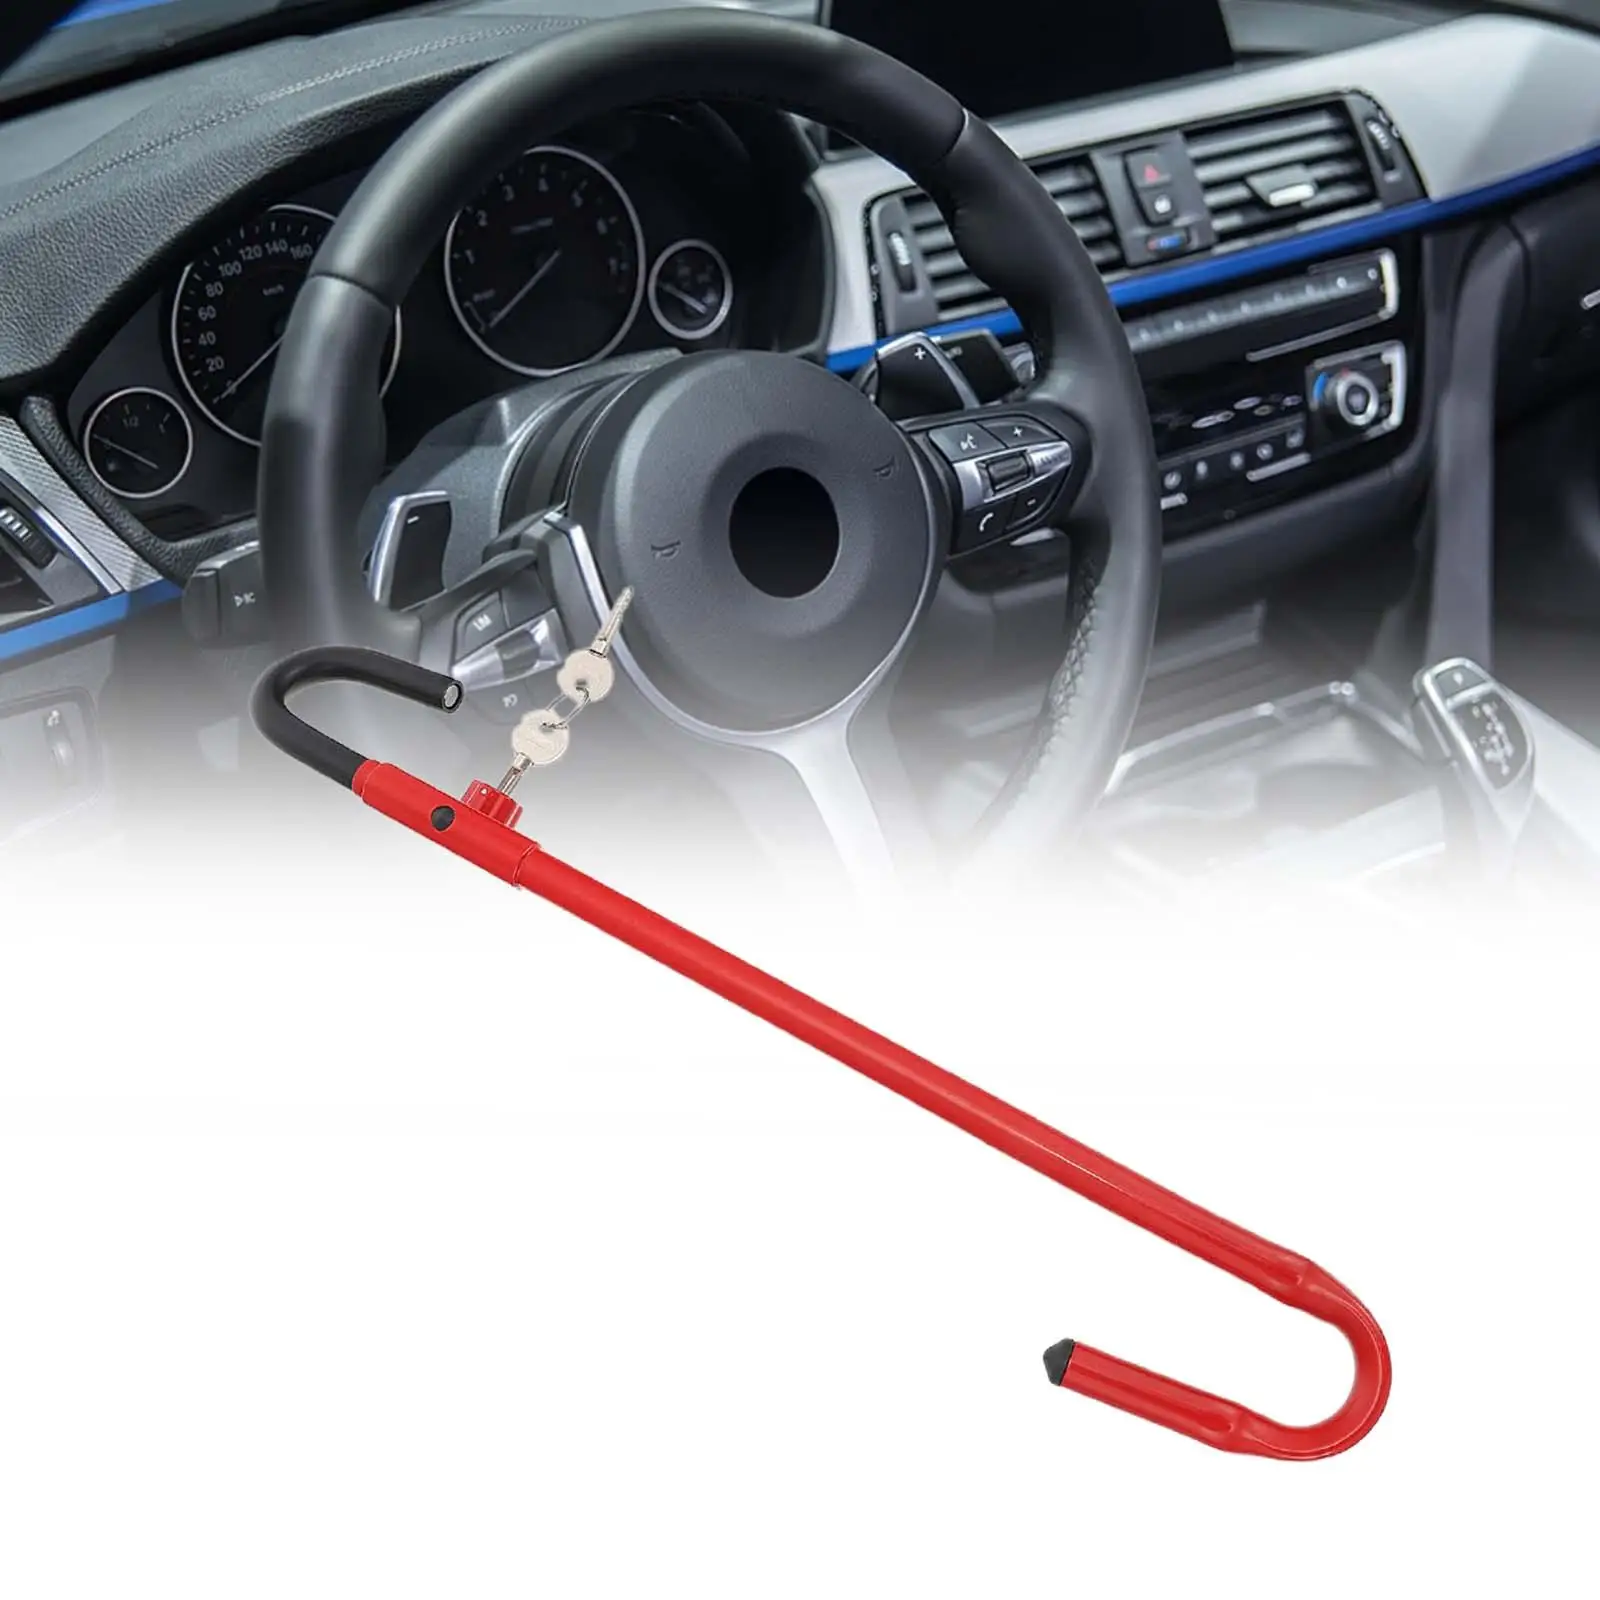 Car Steering Wheel Lock Universal Sturdy with 2 Keys Easily Install Accessories Security Lock for Automobile SUV Car Trucks